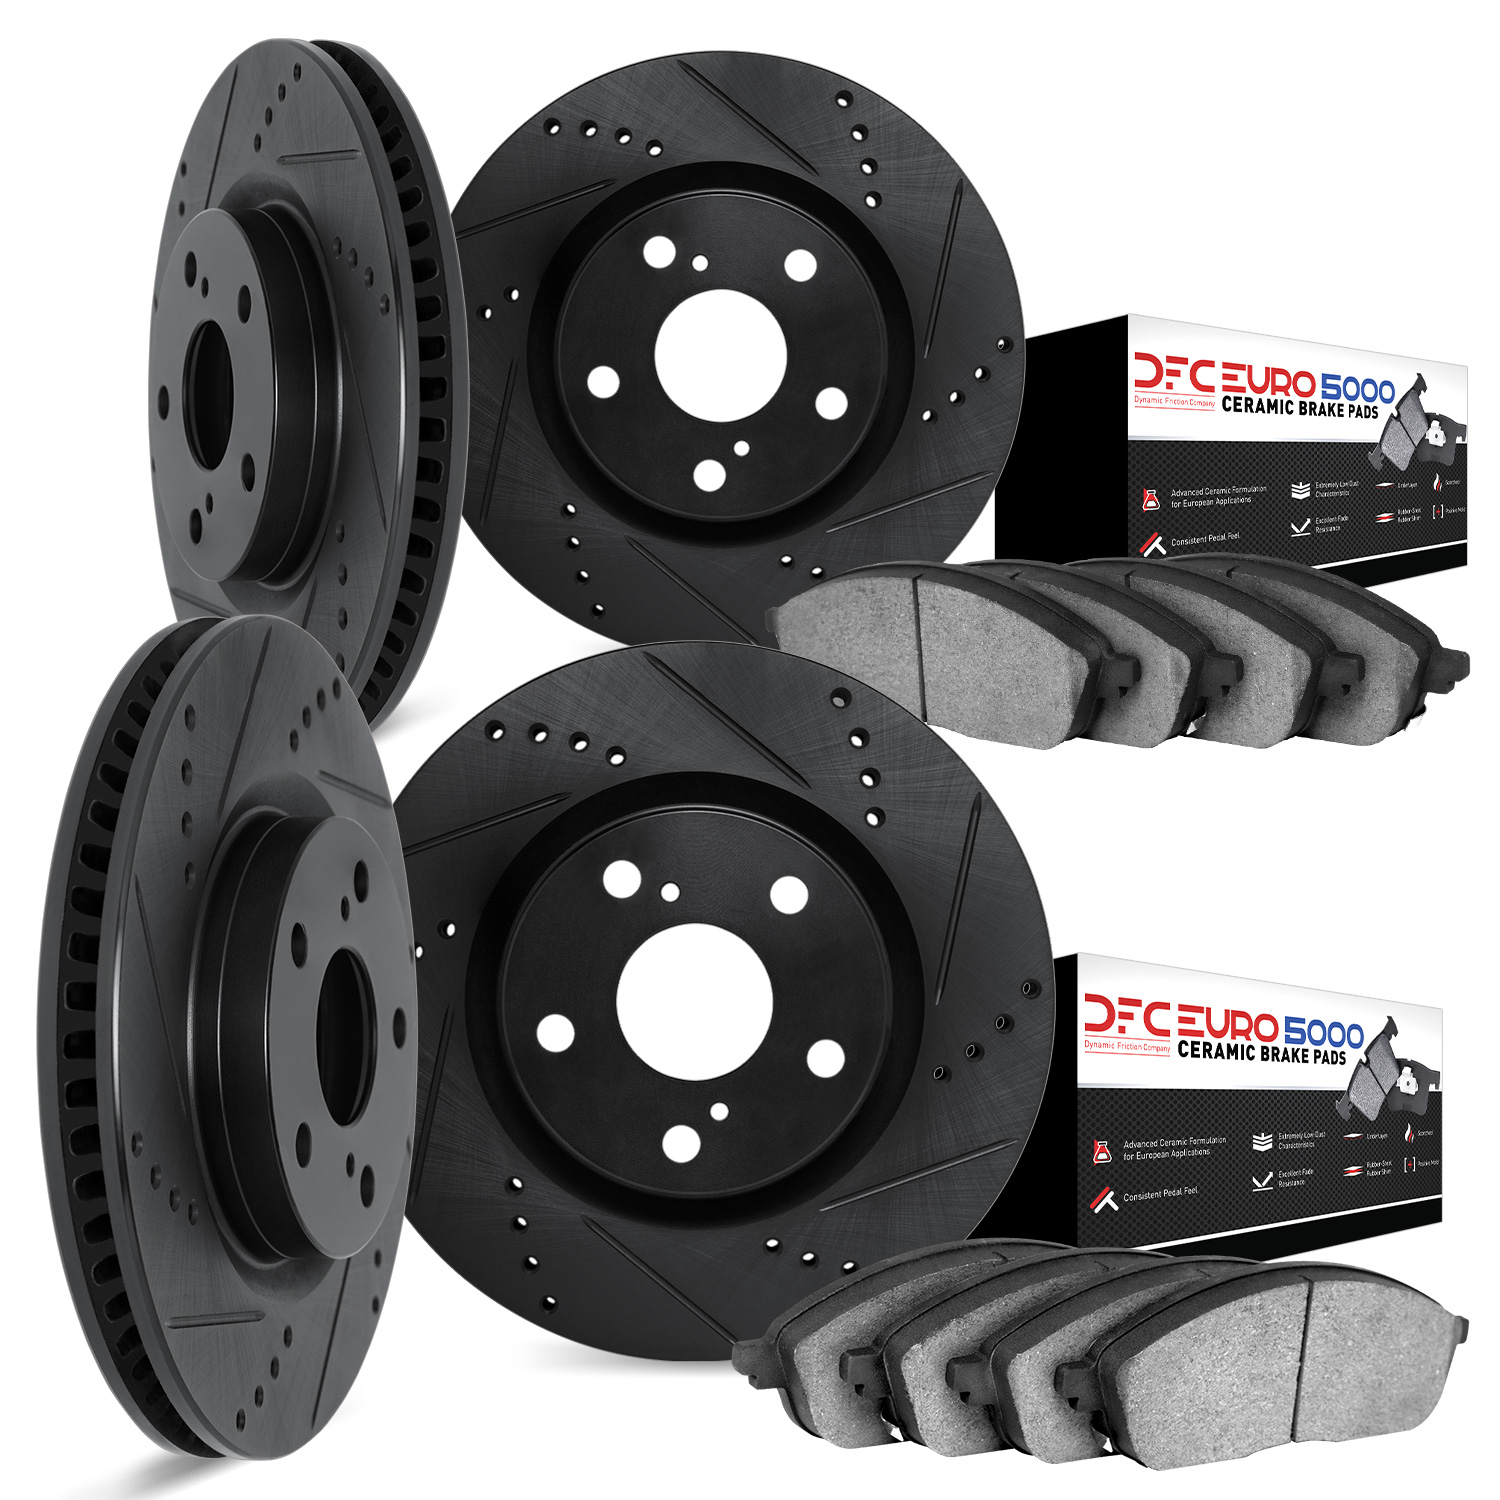 8604-45002 Drilled/Slotted Brake Rotors w/5000 Euro Ceramic Brake Pads Kit [Black], 2010-2015 GM, Position: Front and Rear